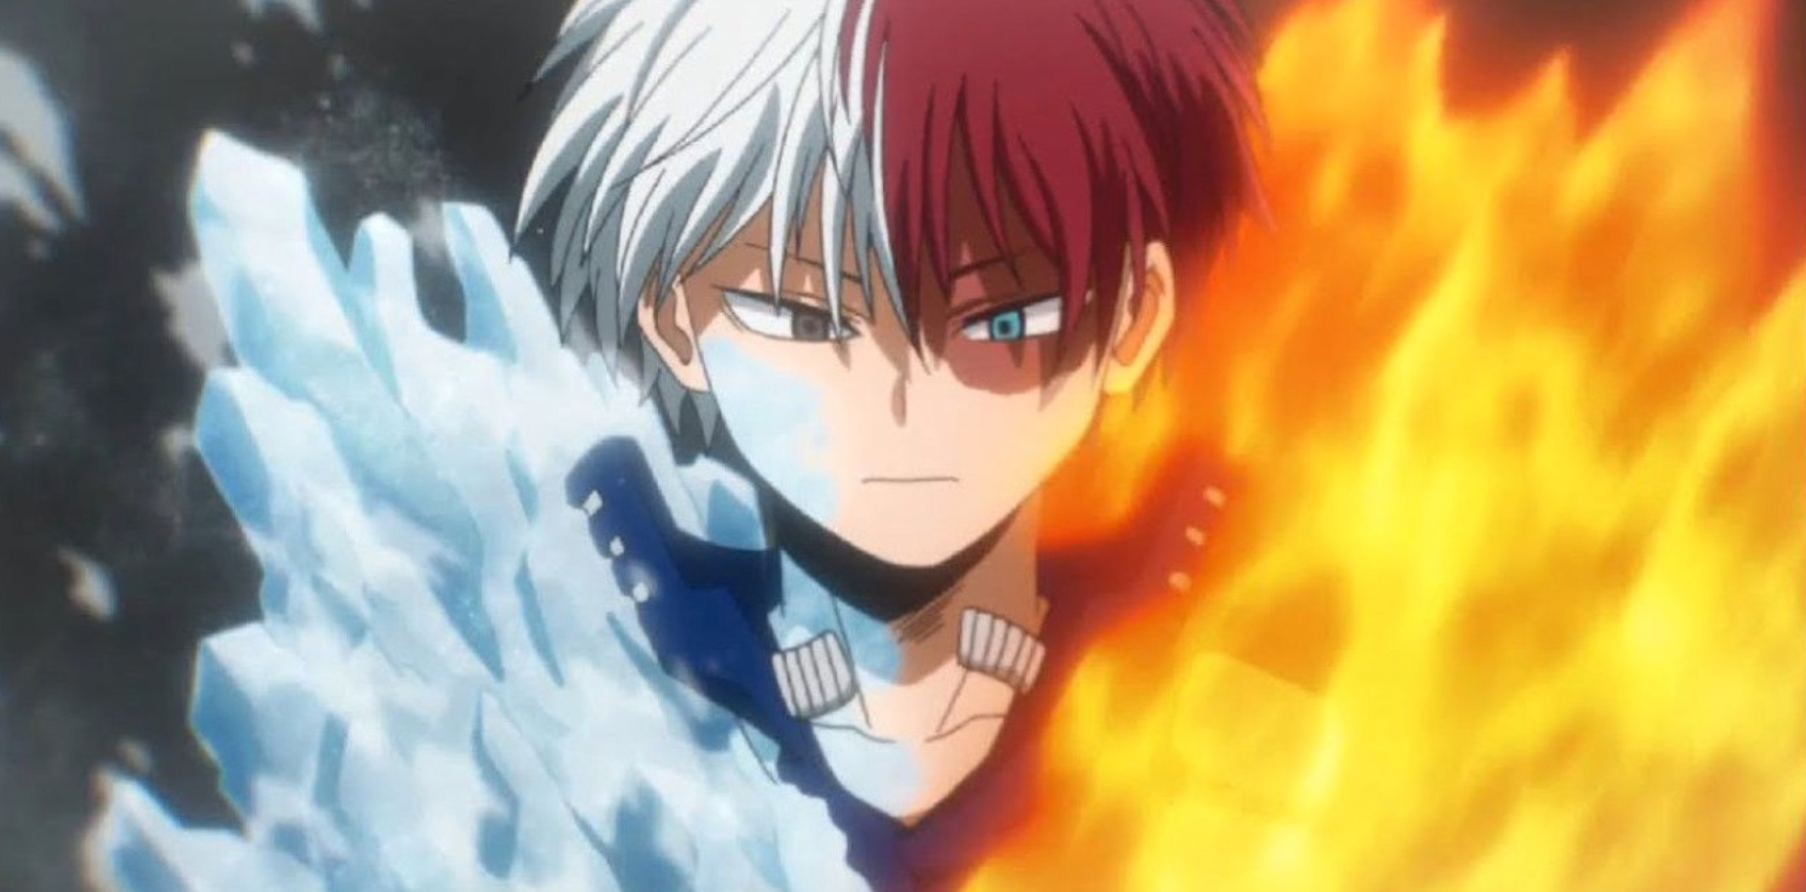 Todoroki using his ice and fire quirk mha